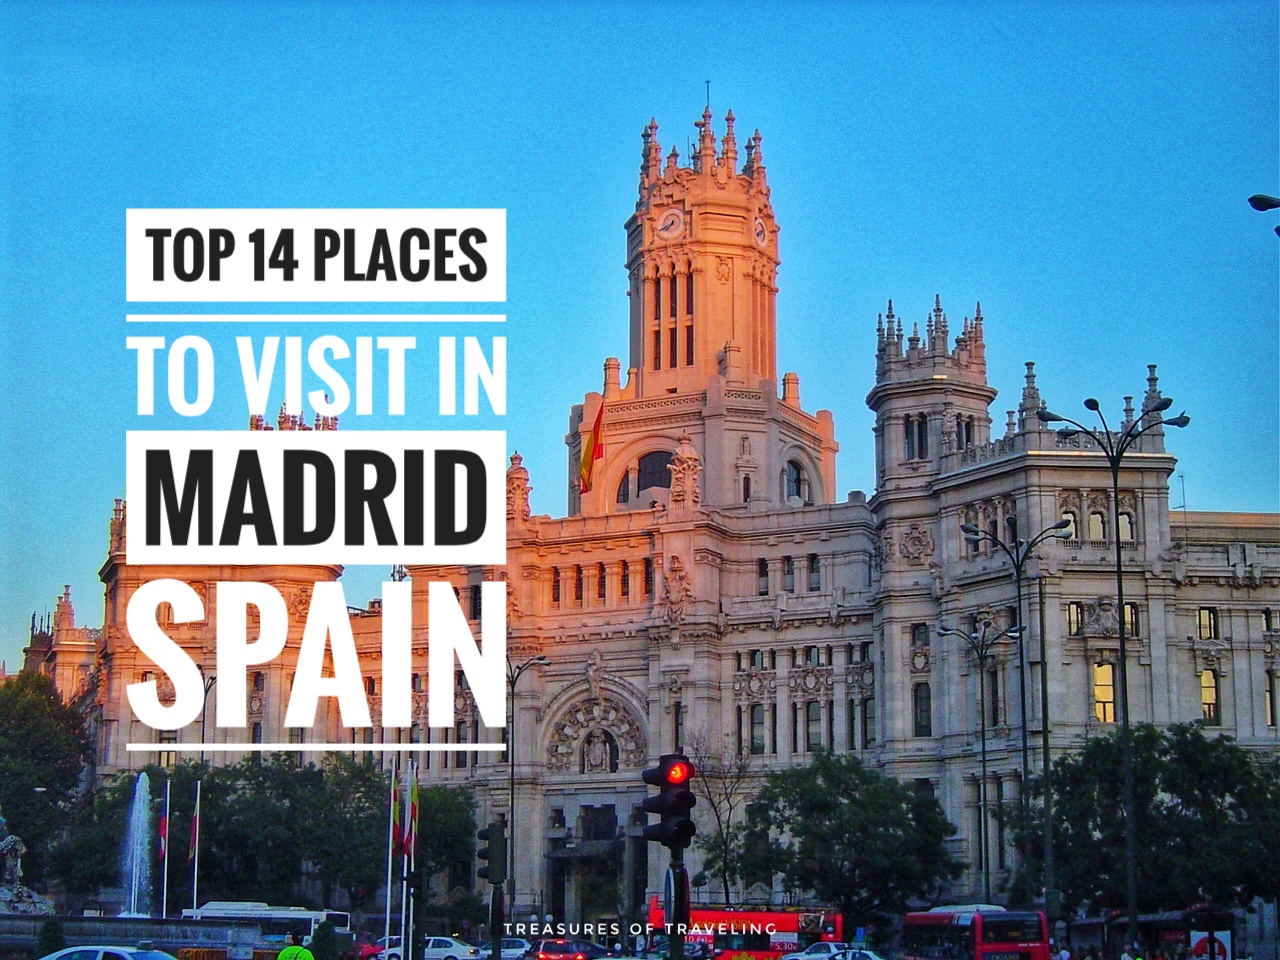 Top 14 Places to Visit in Madrid, Spain!